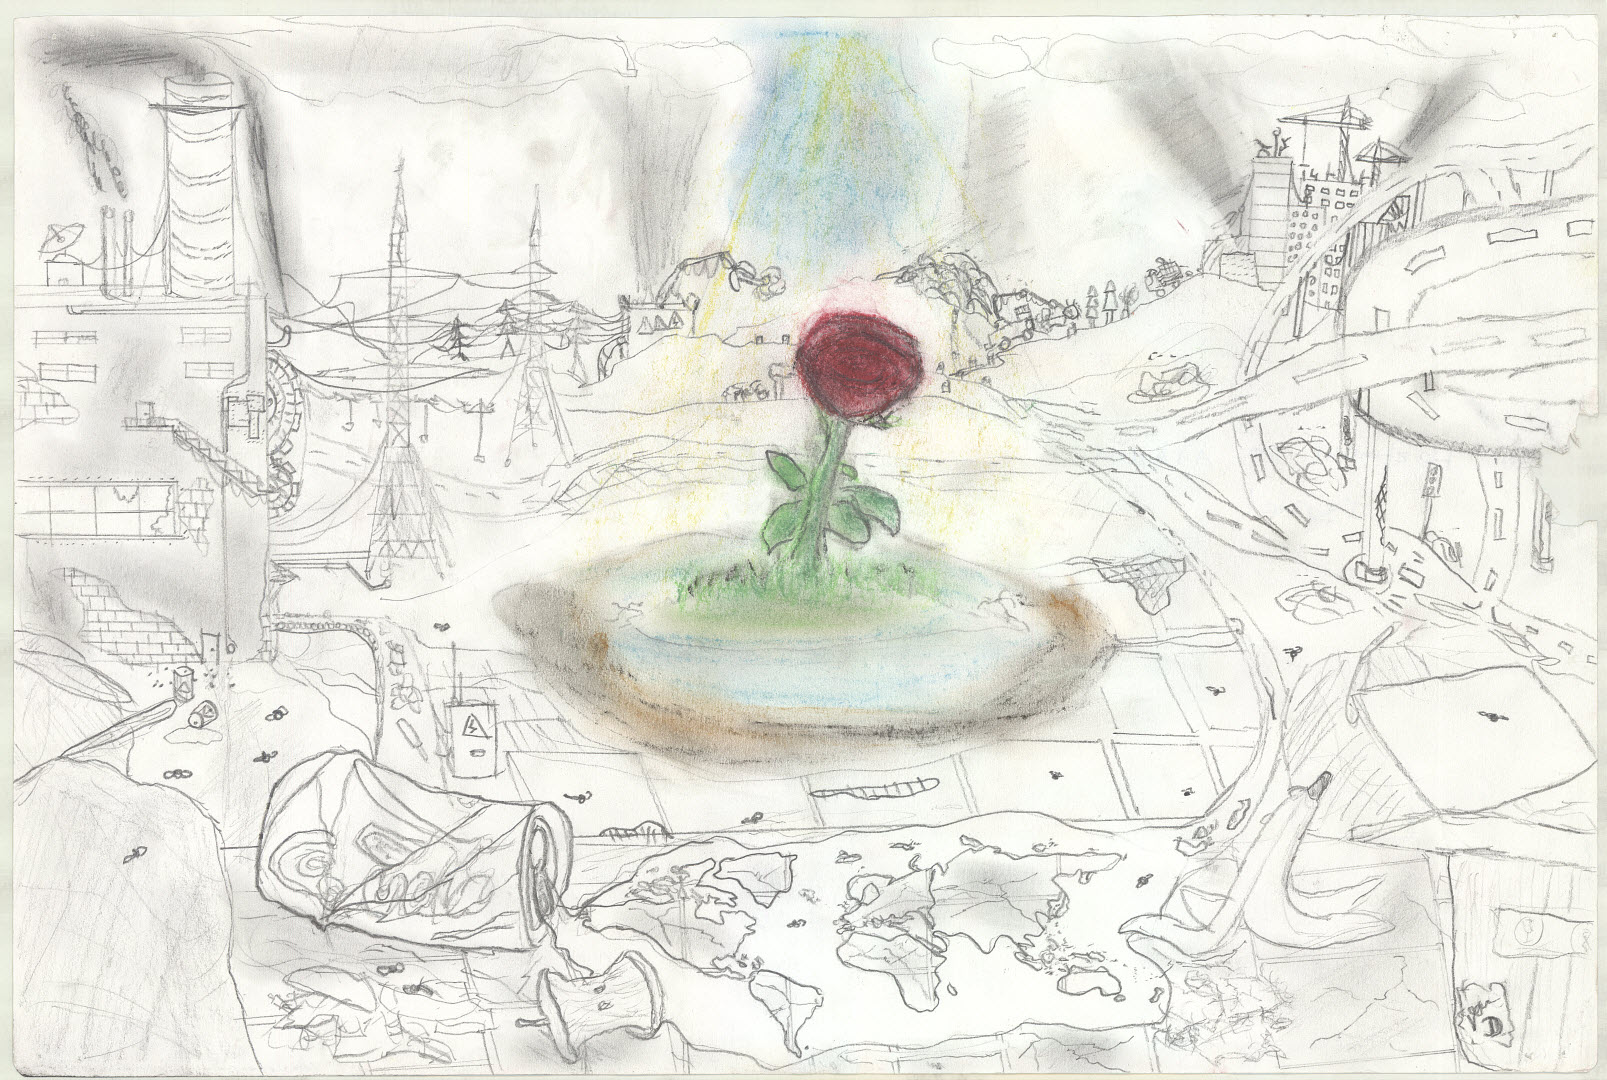 Shows a rose in a lake amongst pollution and litter